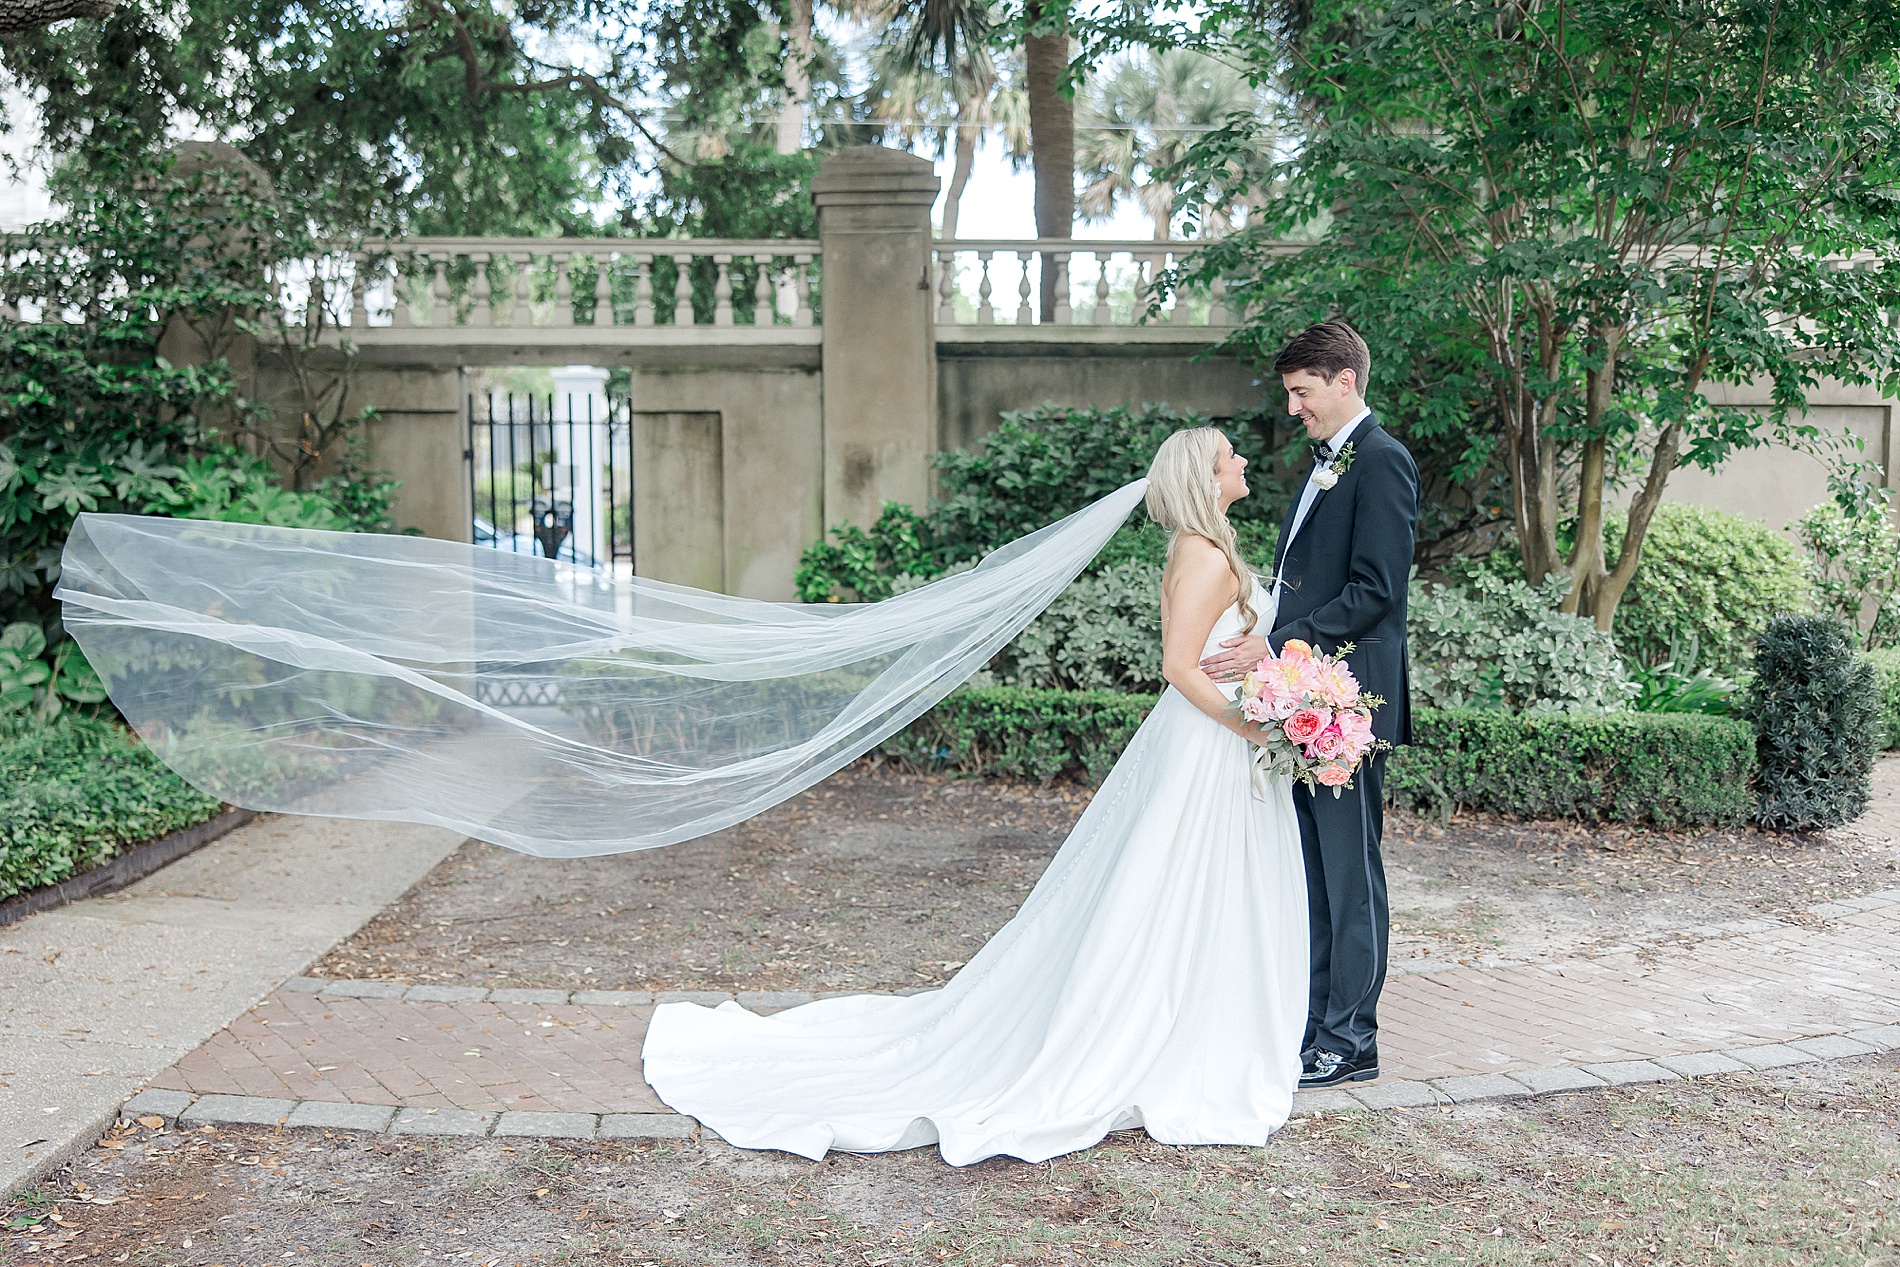 Timeless bride and groom portraits